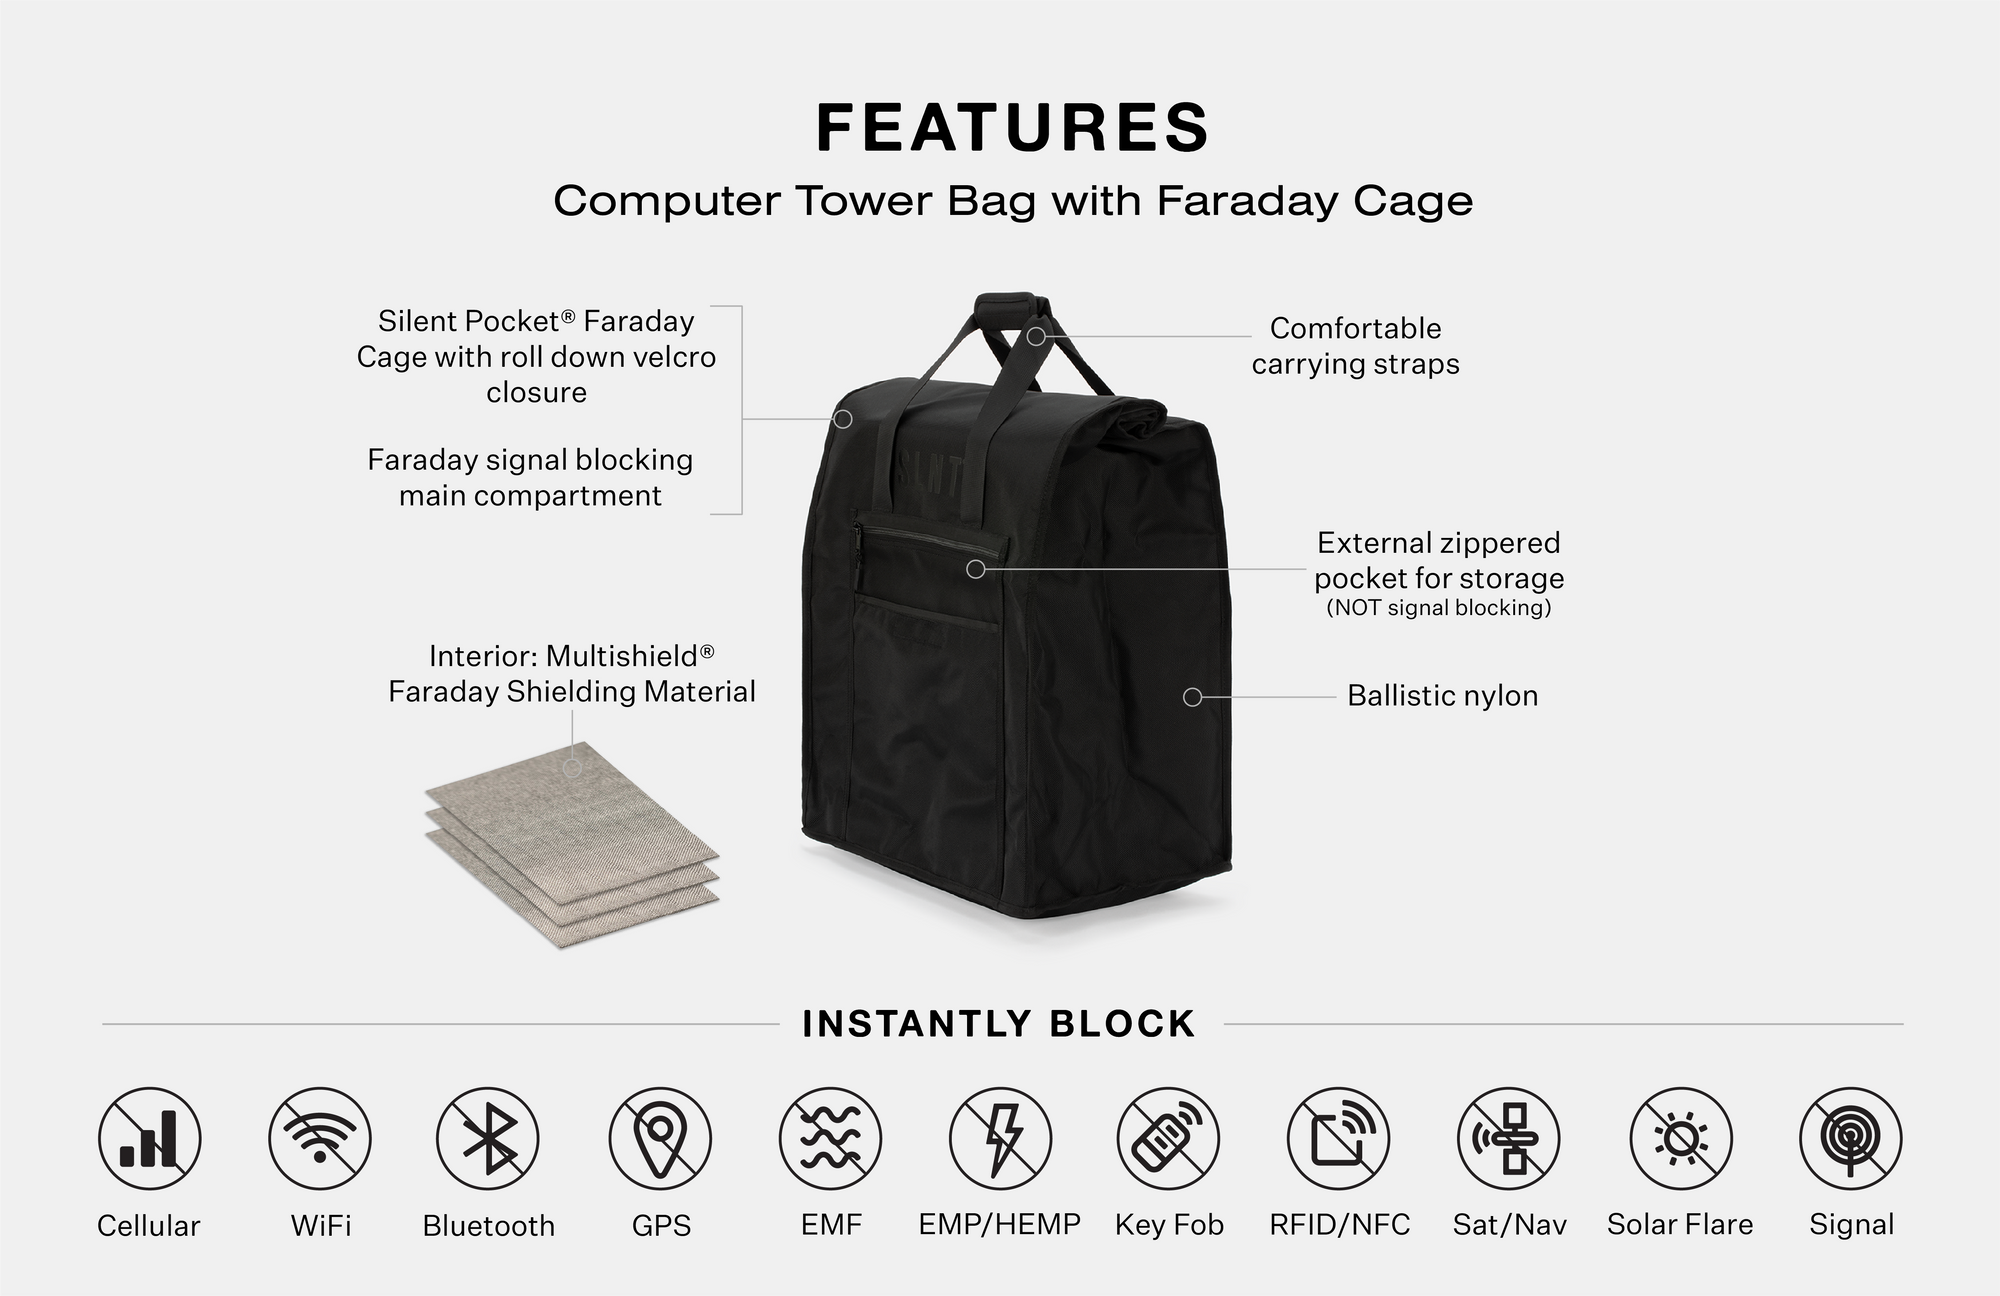 Computer Tower Bag with Faraday Cage